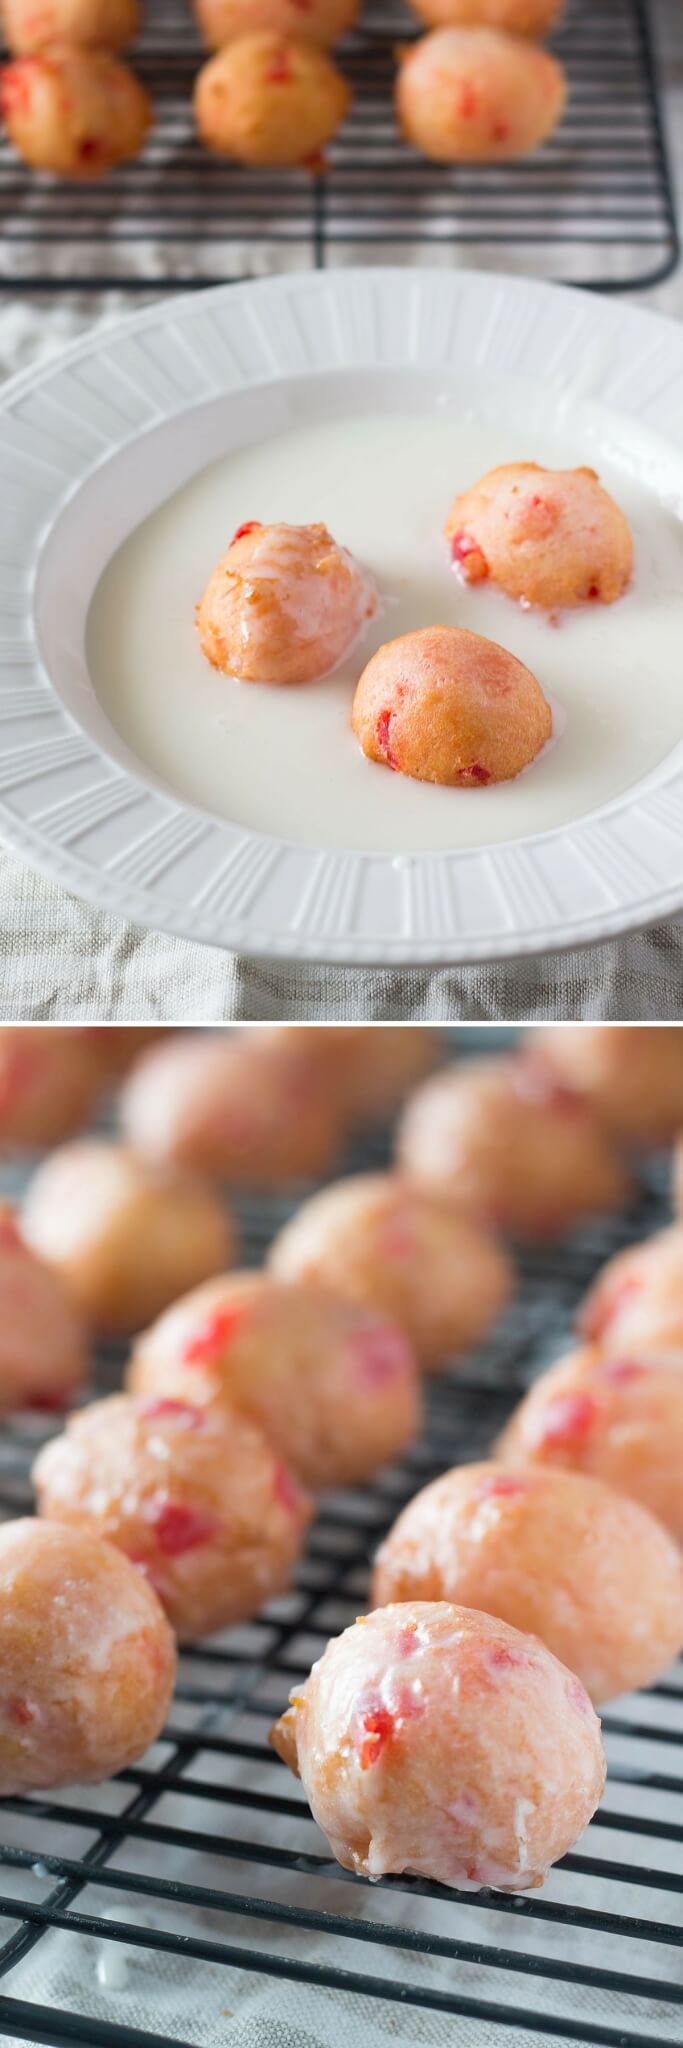 Cherry Doughnut Holes made from scratch! Delicious cake doughnut texture, perfectly pink in color & dripped in sweet glaze. You NEED to make these!